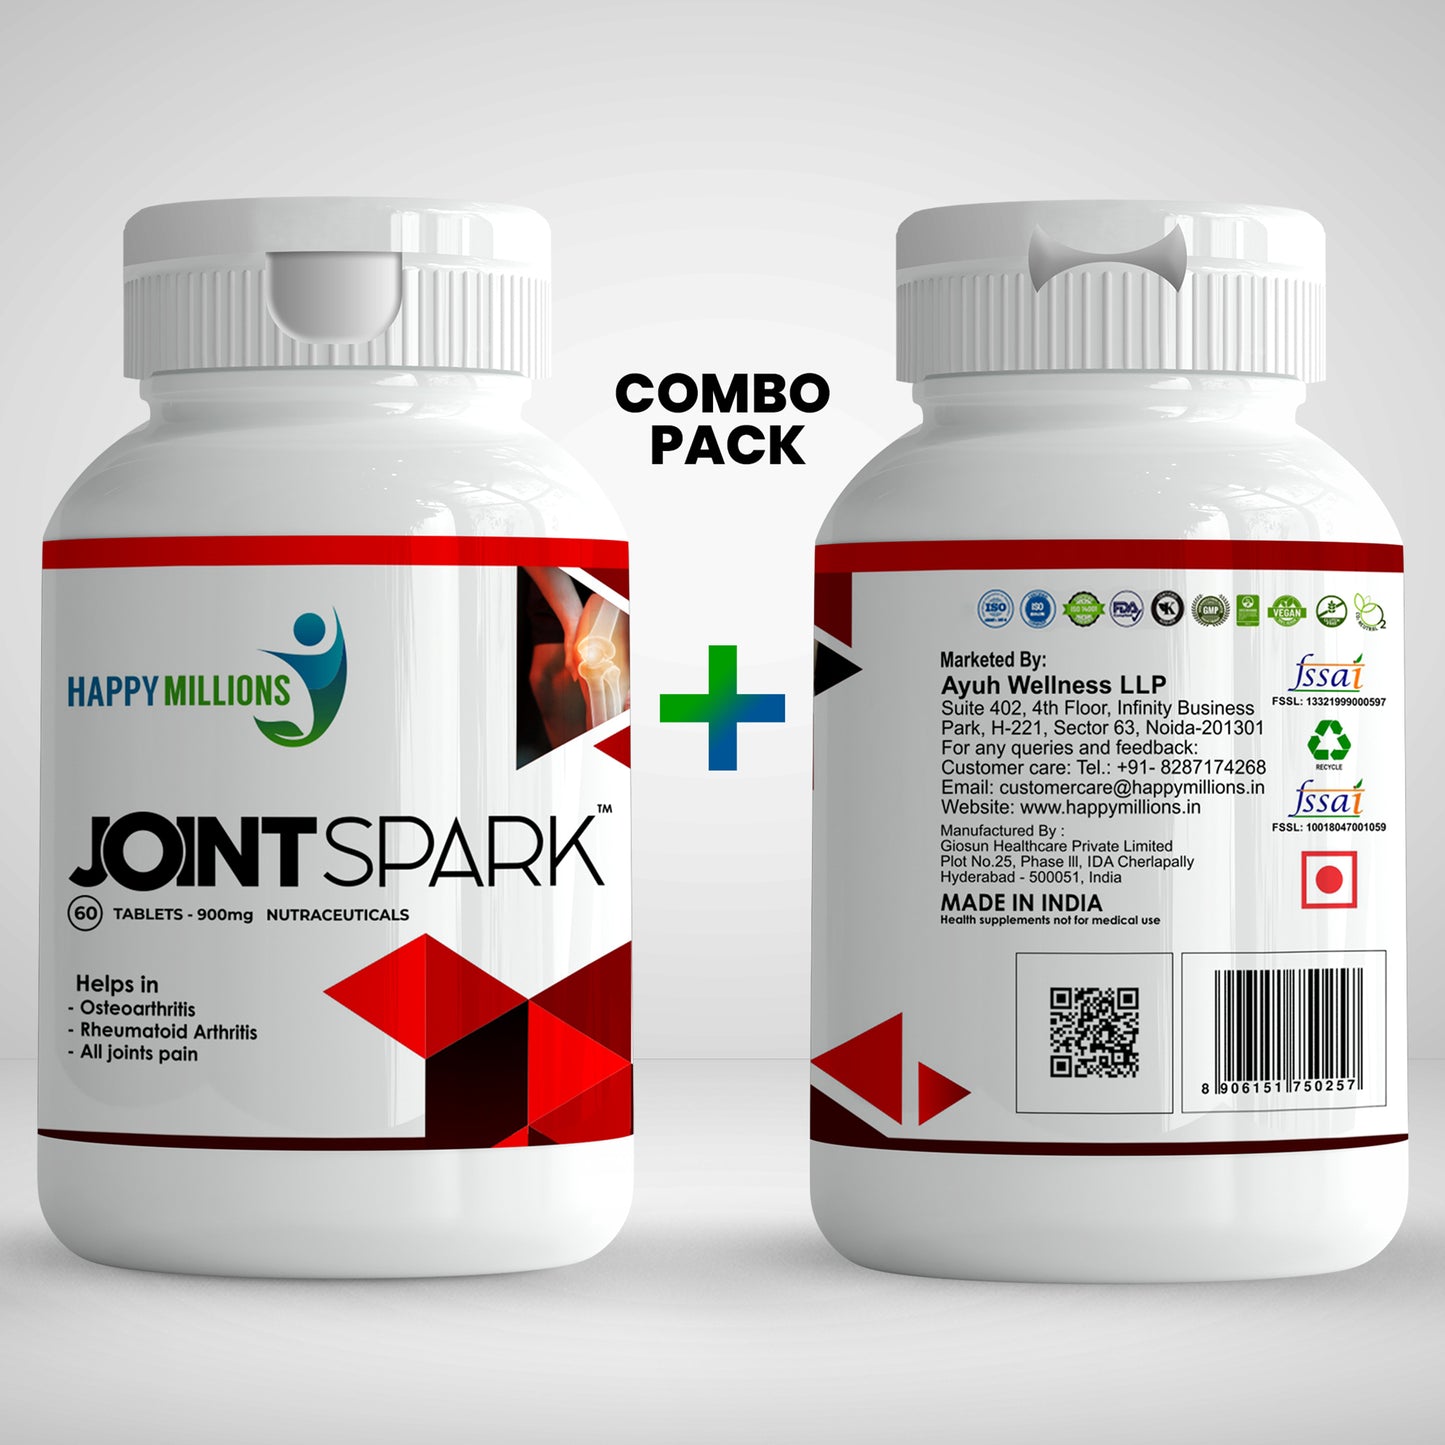 Experience Enhanced Joint Health with Happy Millions Jointspark: Natural Relief for Joint Pain & Improved Mobility.